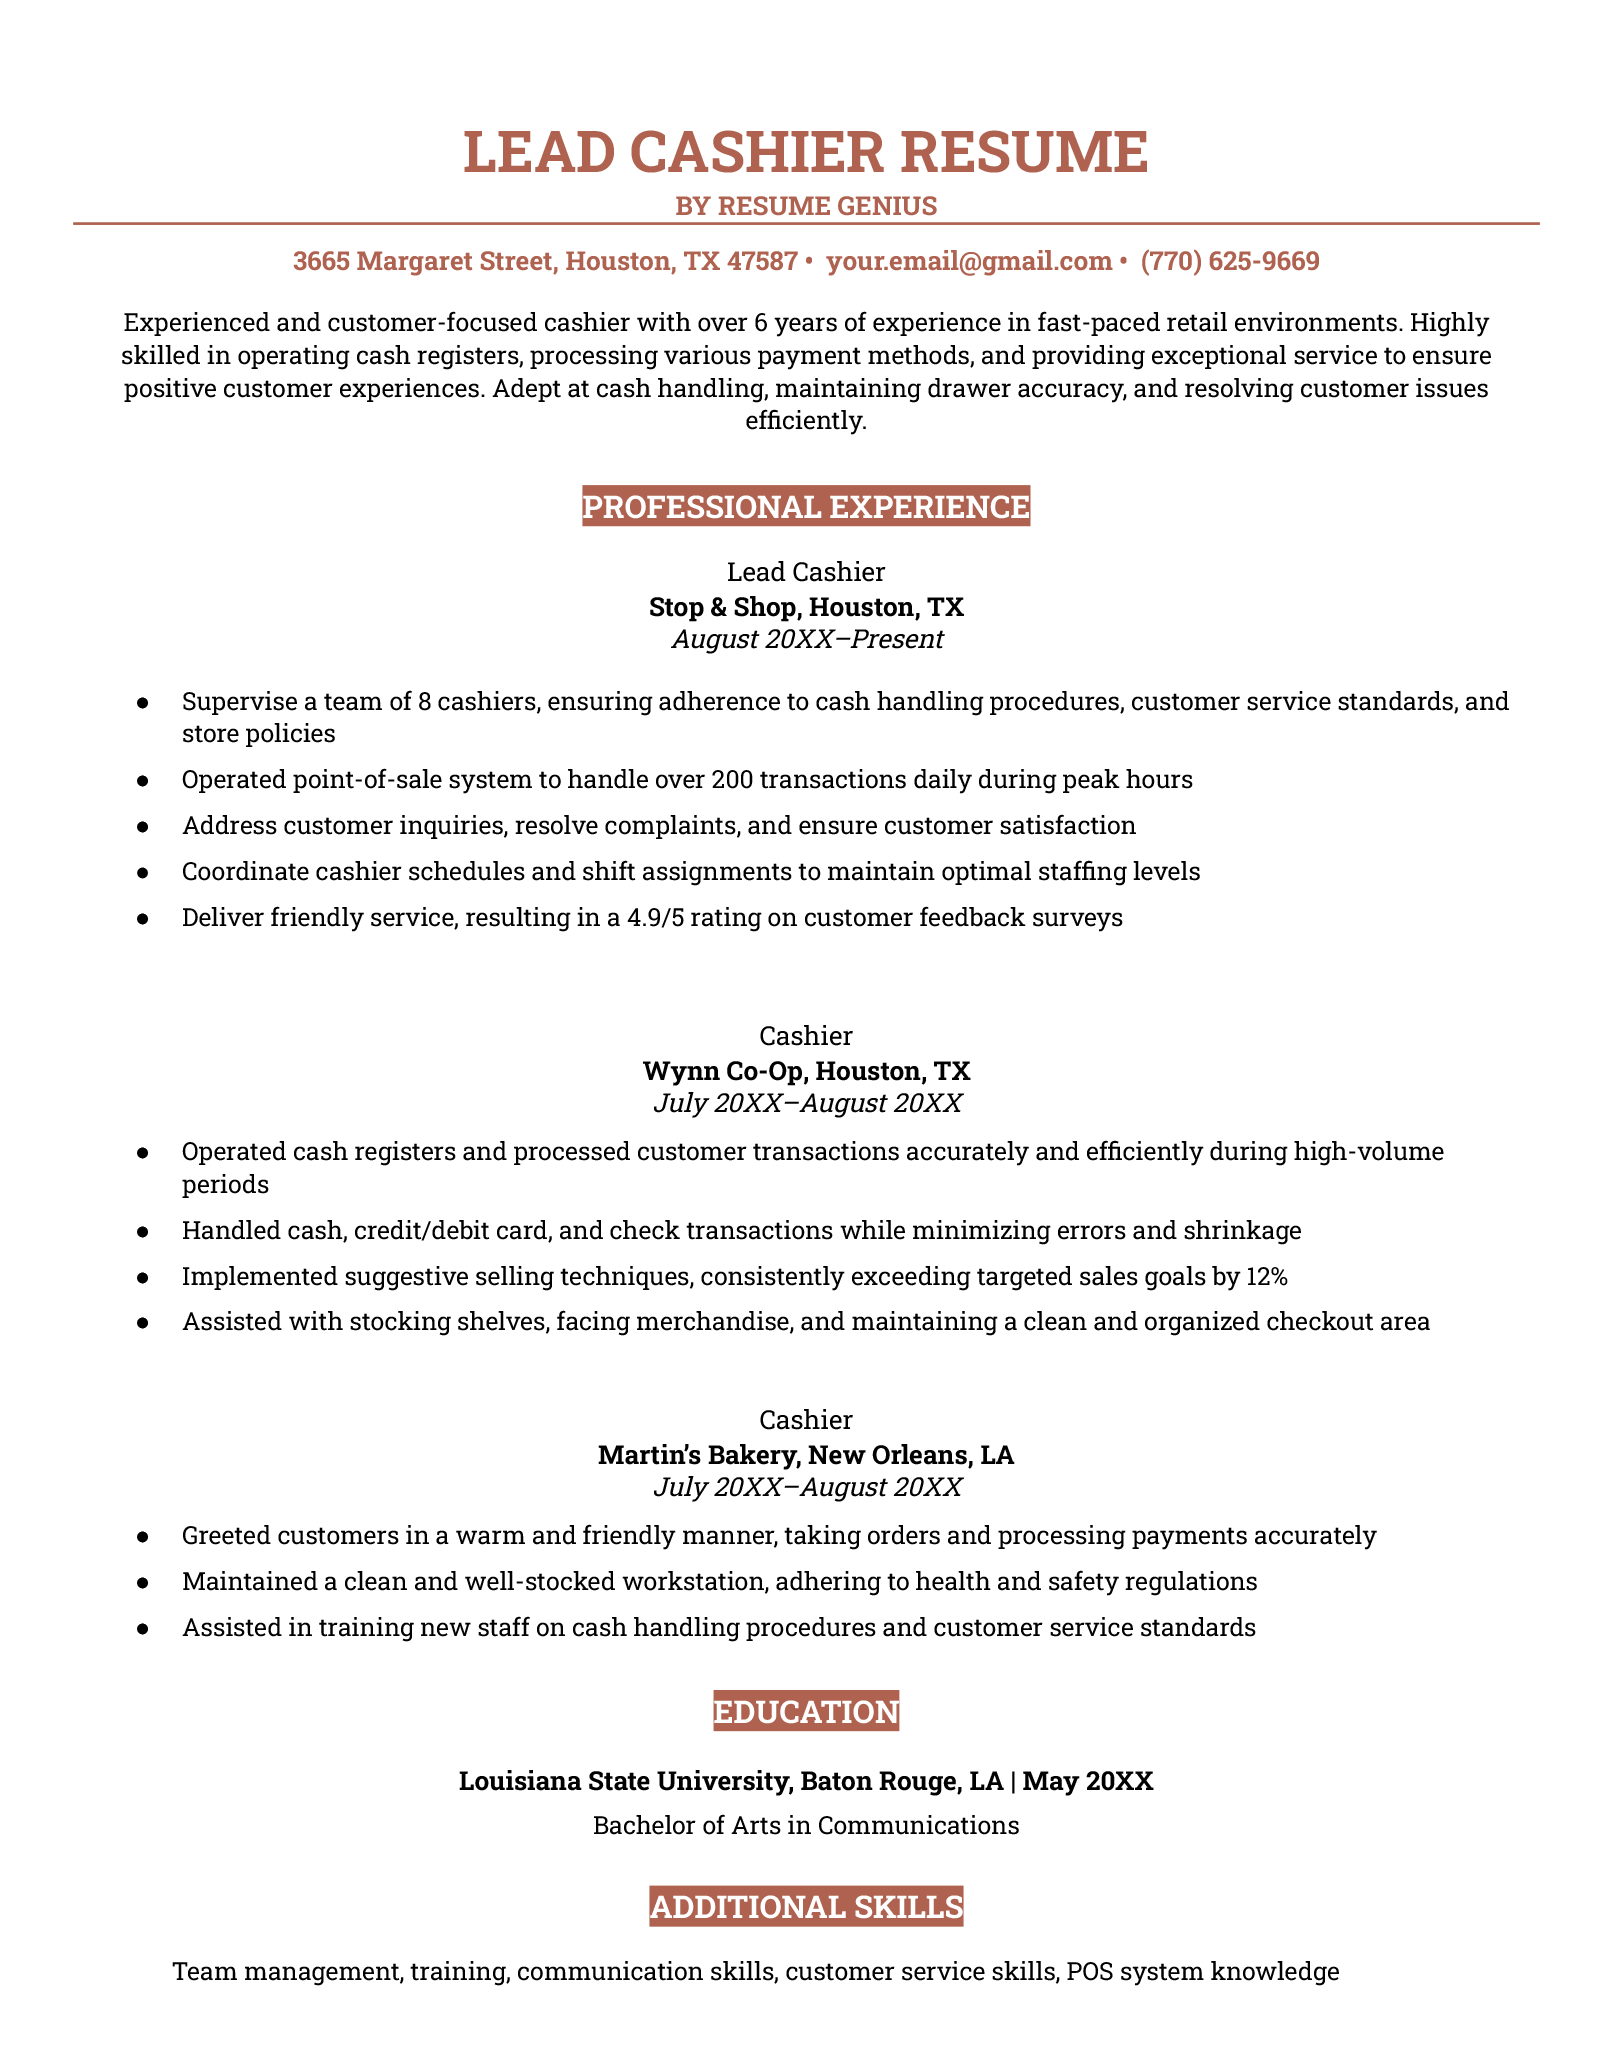 An example of a resume for a lead cashier.